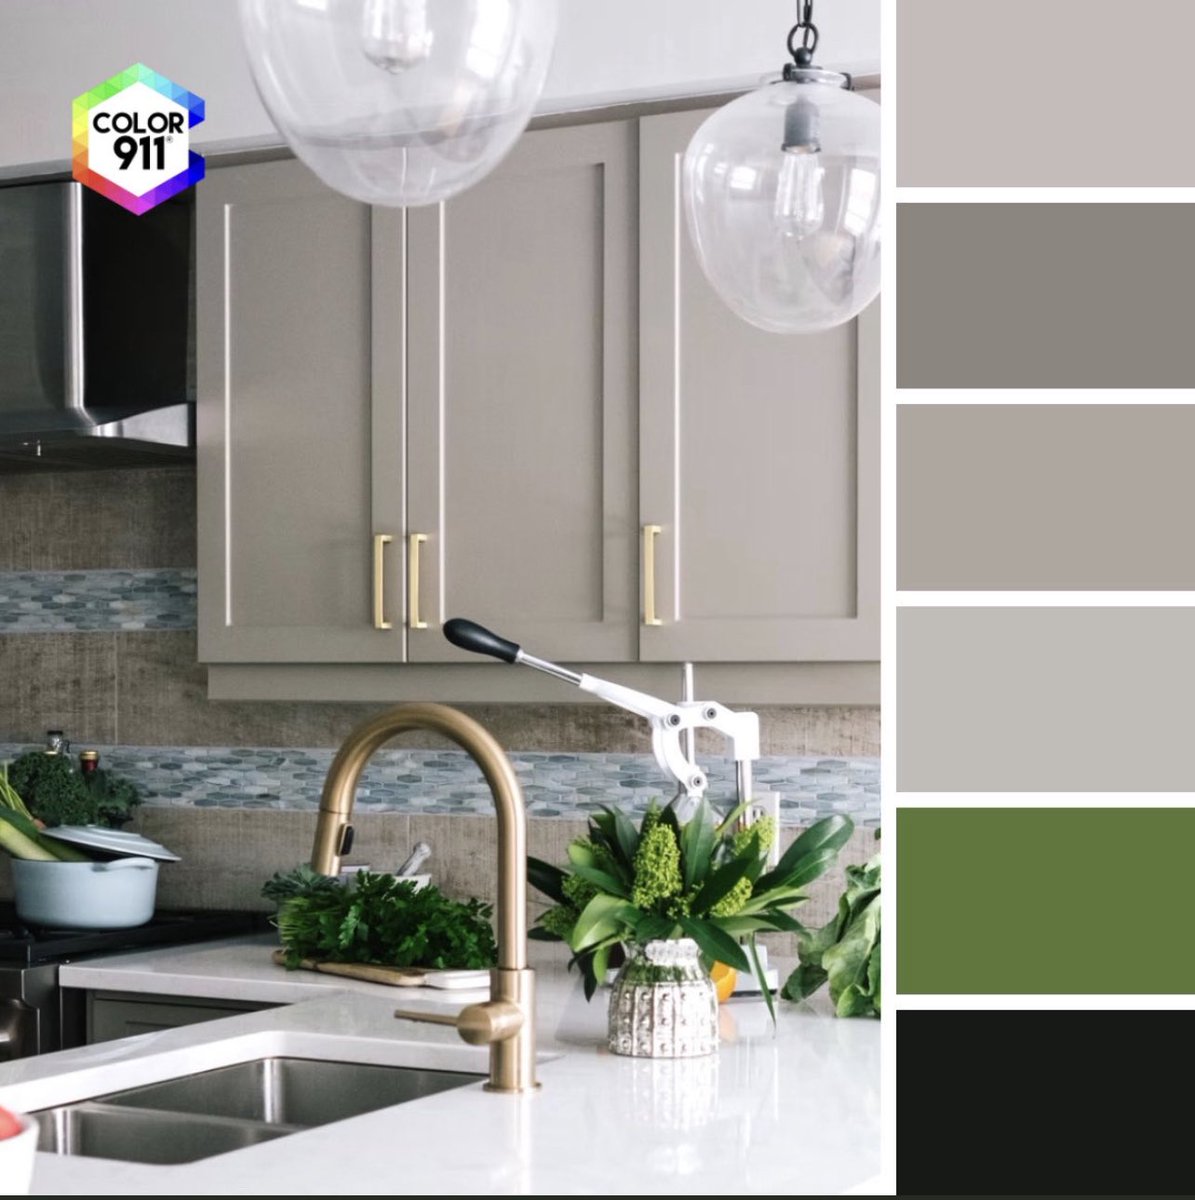 Happy to chat with #kitchen #design pros today about color, here are 2 of my favorite kitchen #colors.
Colors swatches created with the #Color911 #app.  #KBtribechat